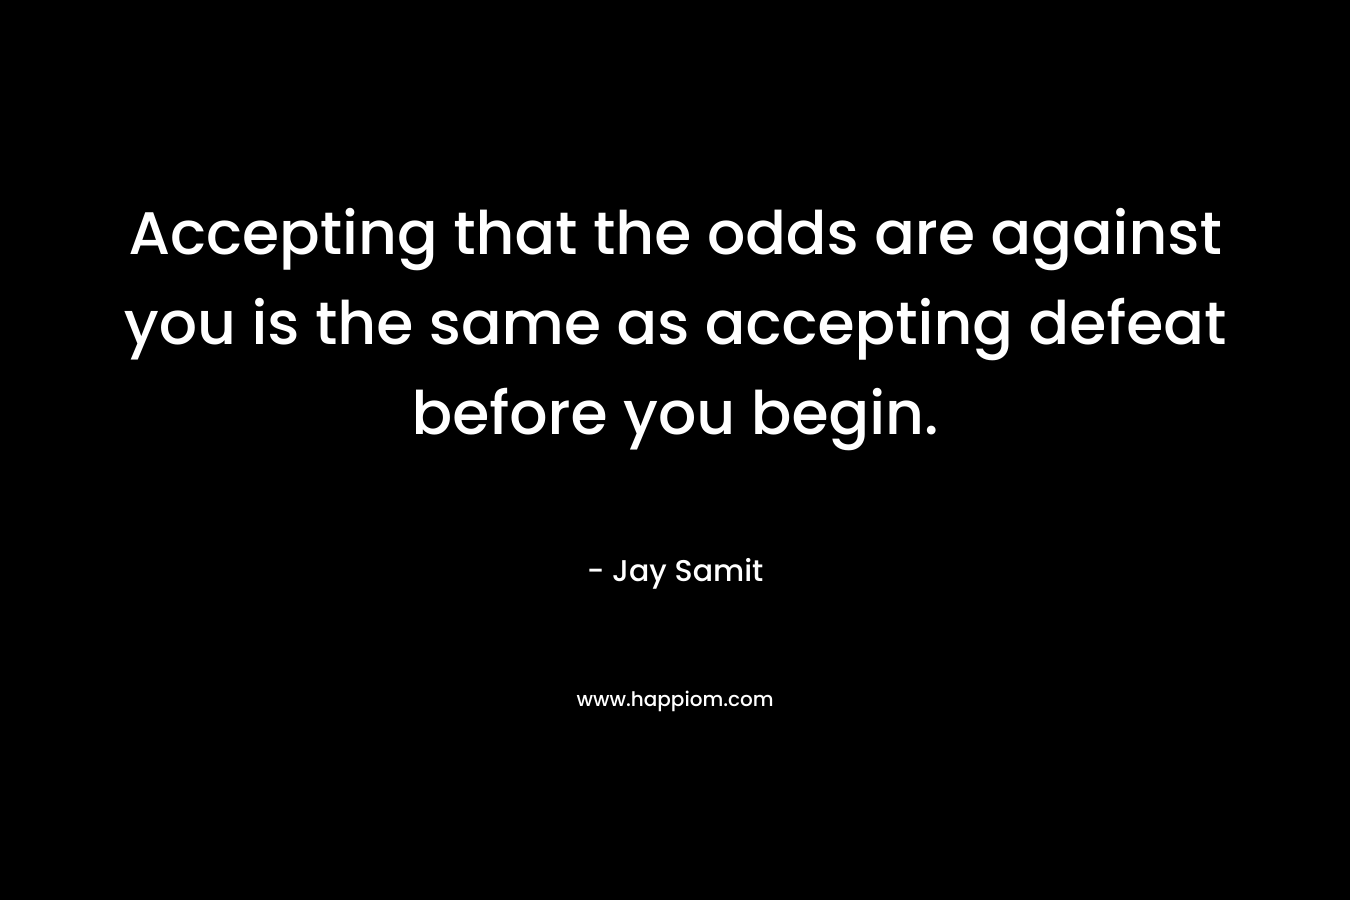 Accepting that the odds are against you is the same as accepting defeat before you begin.